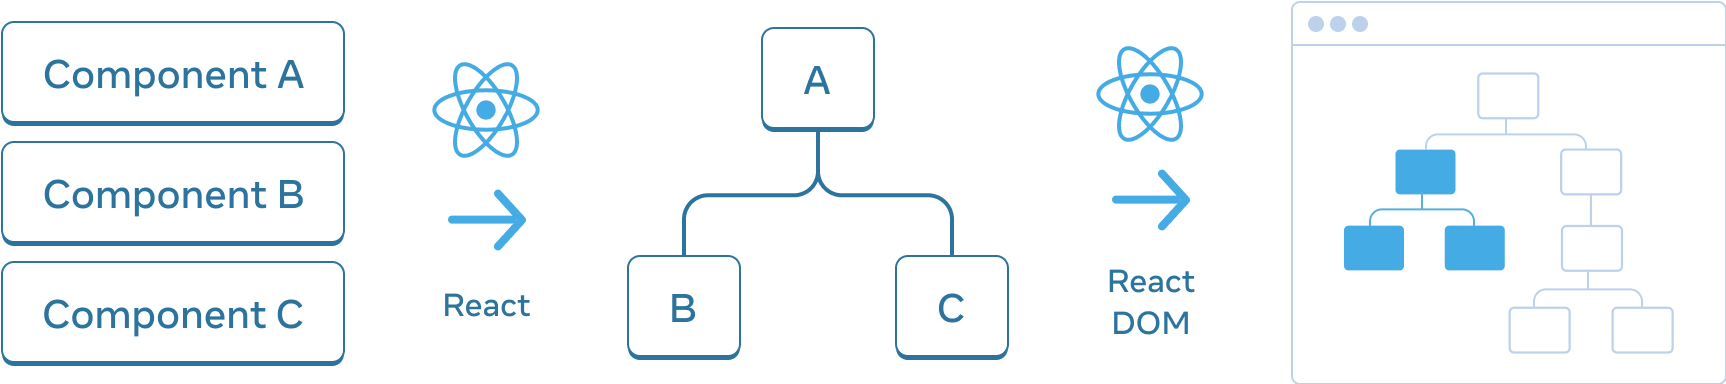 Diagram with three sections arranged horizontally. In the first section, there are three rectangles stacked vertically, with labels 'Component A', 'Component B', and 'Component C'. Transitioning to the next pane is an arrow with the React logo on top labeled 'React'. The middle section contains a tree of components, with the root labeled 'A' and two children labeled 'B' and 'C'. The next section is again transitioned using an arrow with the React logo on top labeled 'React DOM'. The third and final section is a wireframe of a browser, containing a tree of 8 nodes, which has only a subset highlighted (indicating the subtree from the middle section).